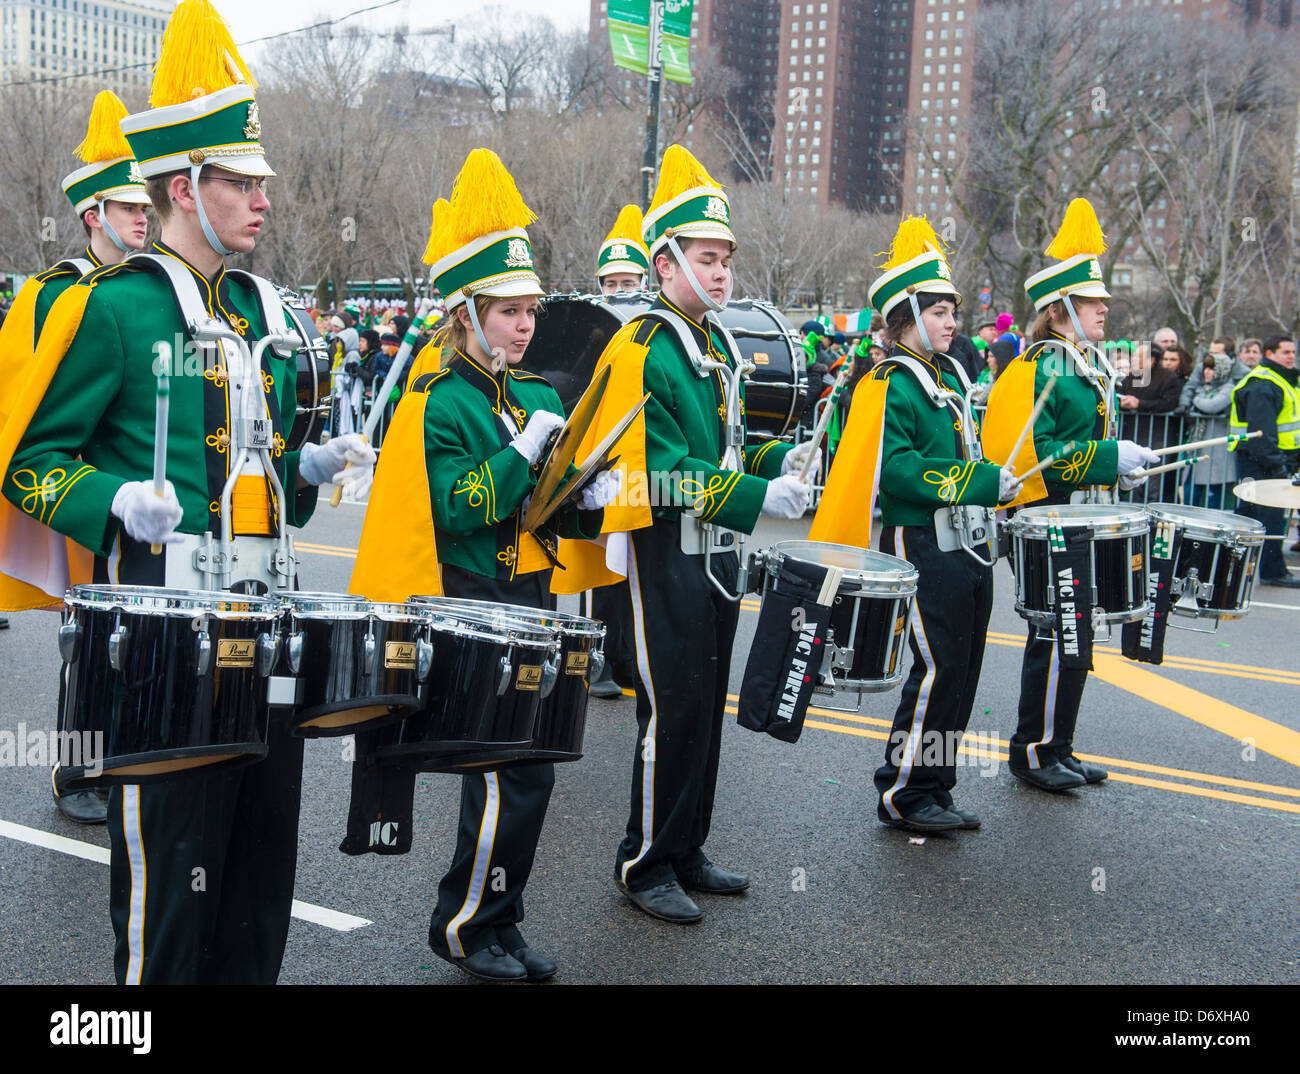 Band marching at the annual Saint Patrick's Day Parade in Chicago Stock Photo